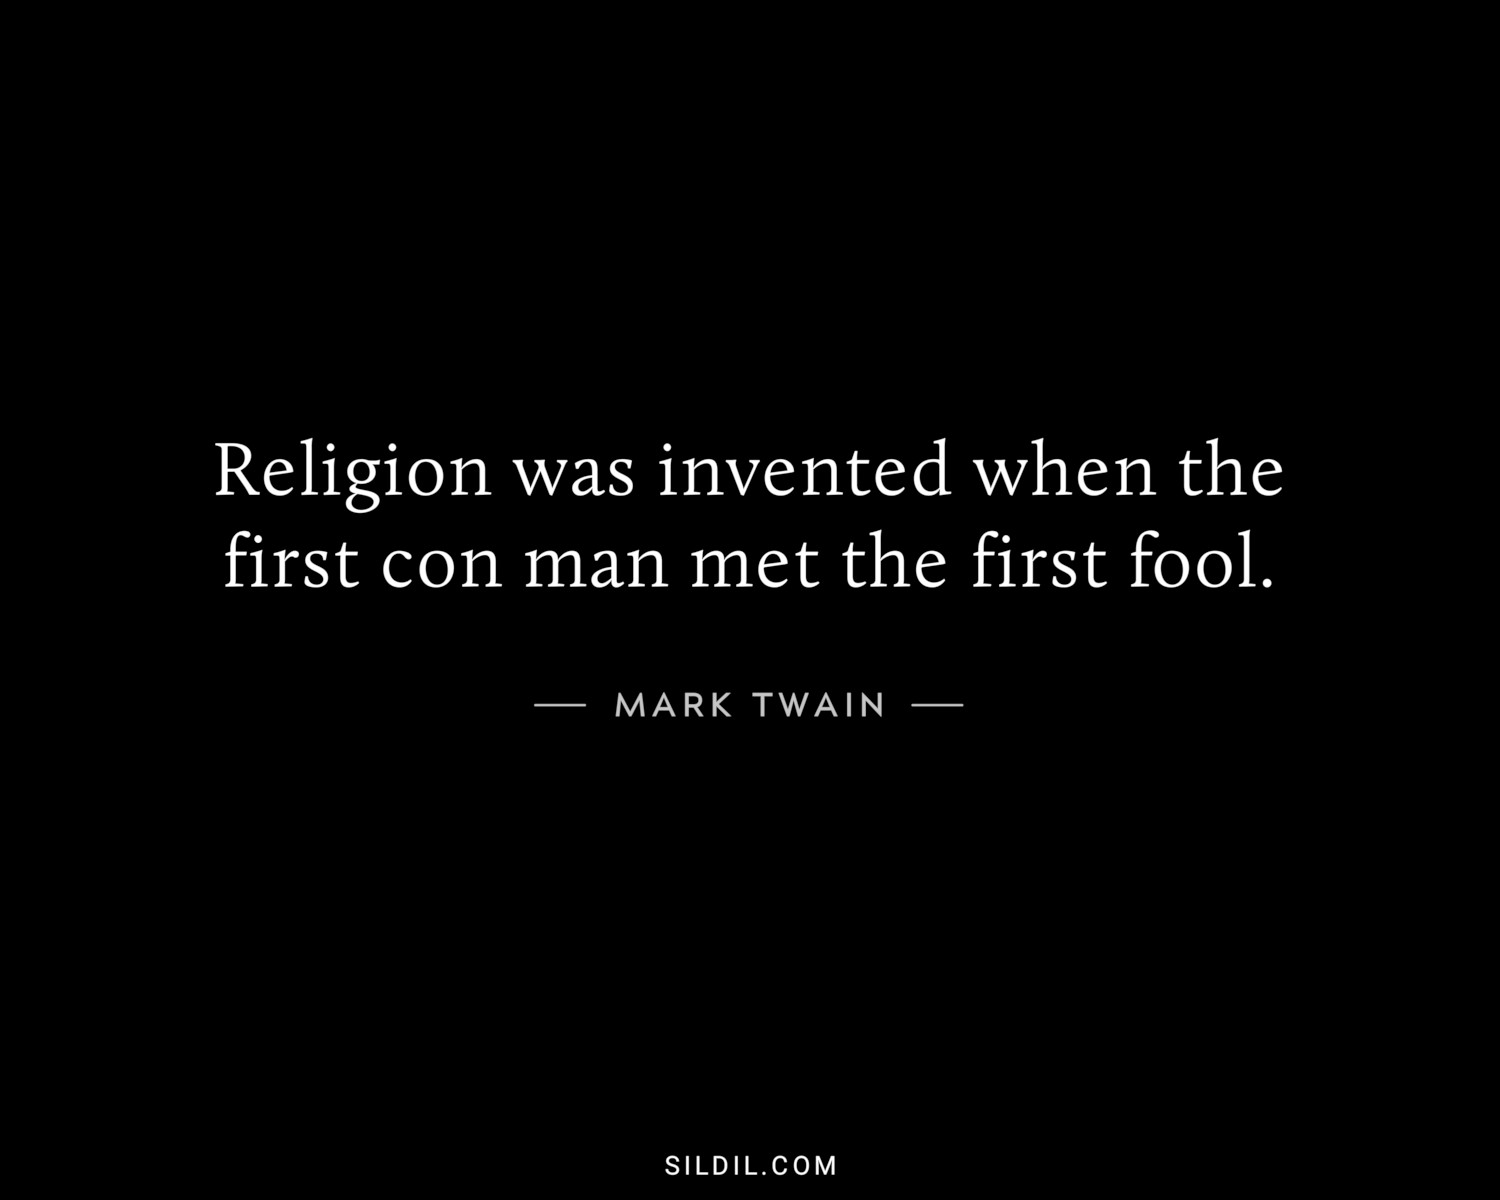 Religion was invented when the first con man met the first fool.